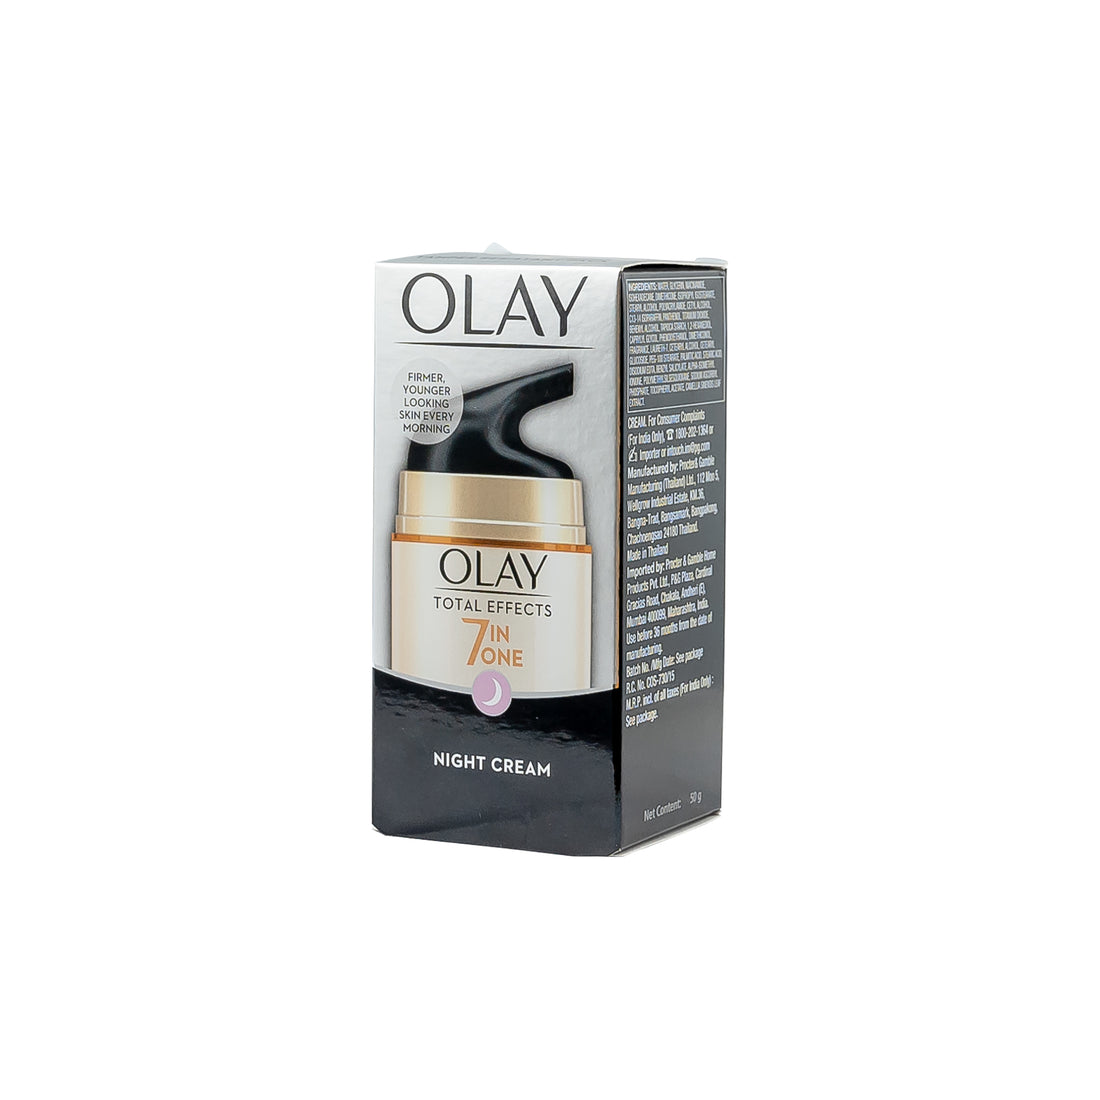 Olay Total Effects 7 in 1 Night Cream (50gm)